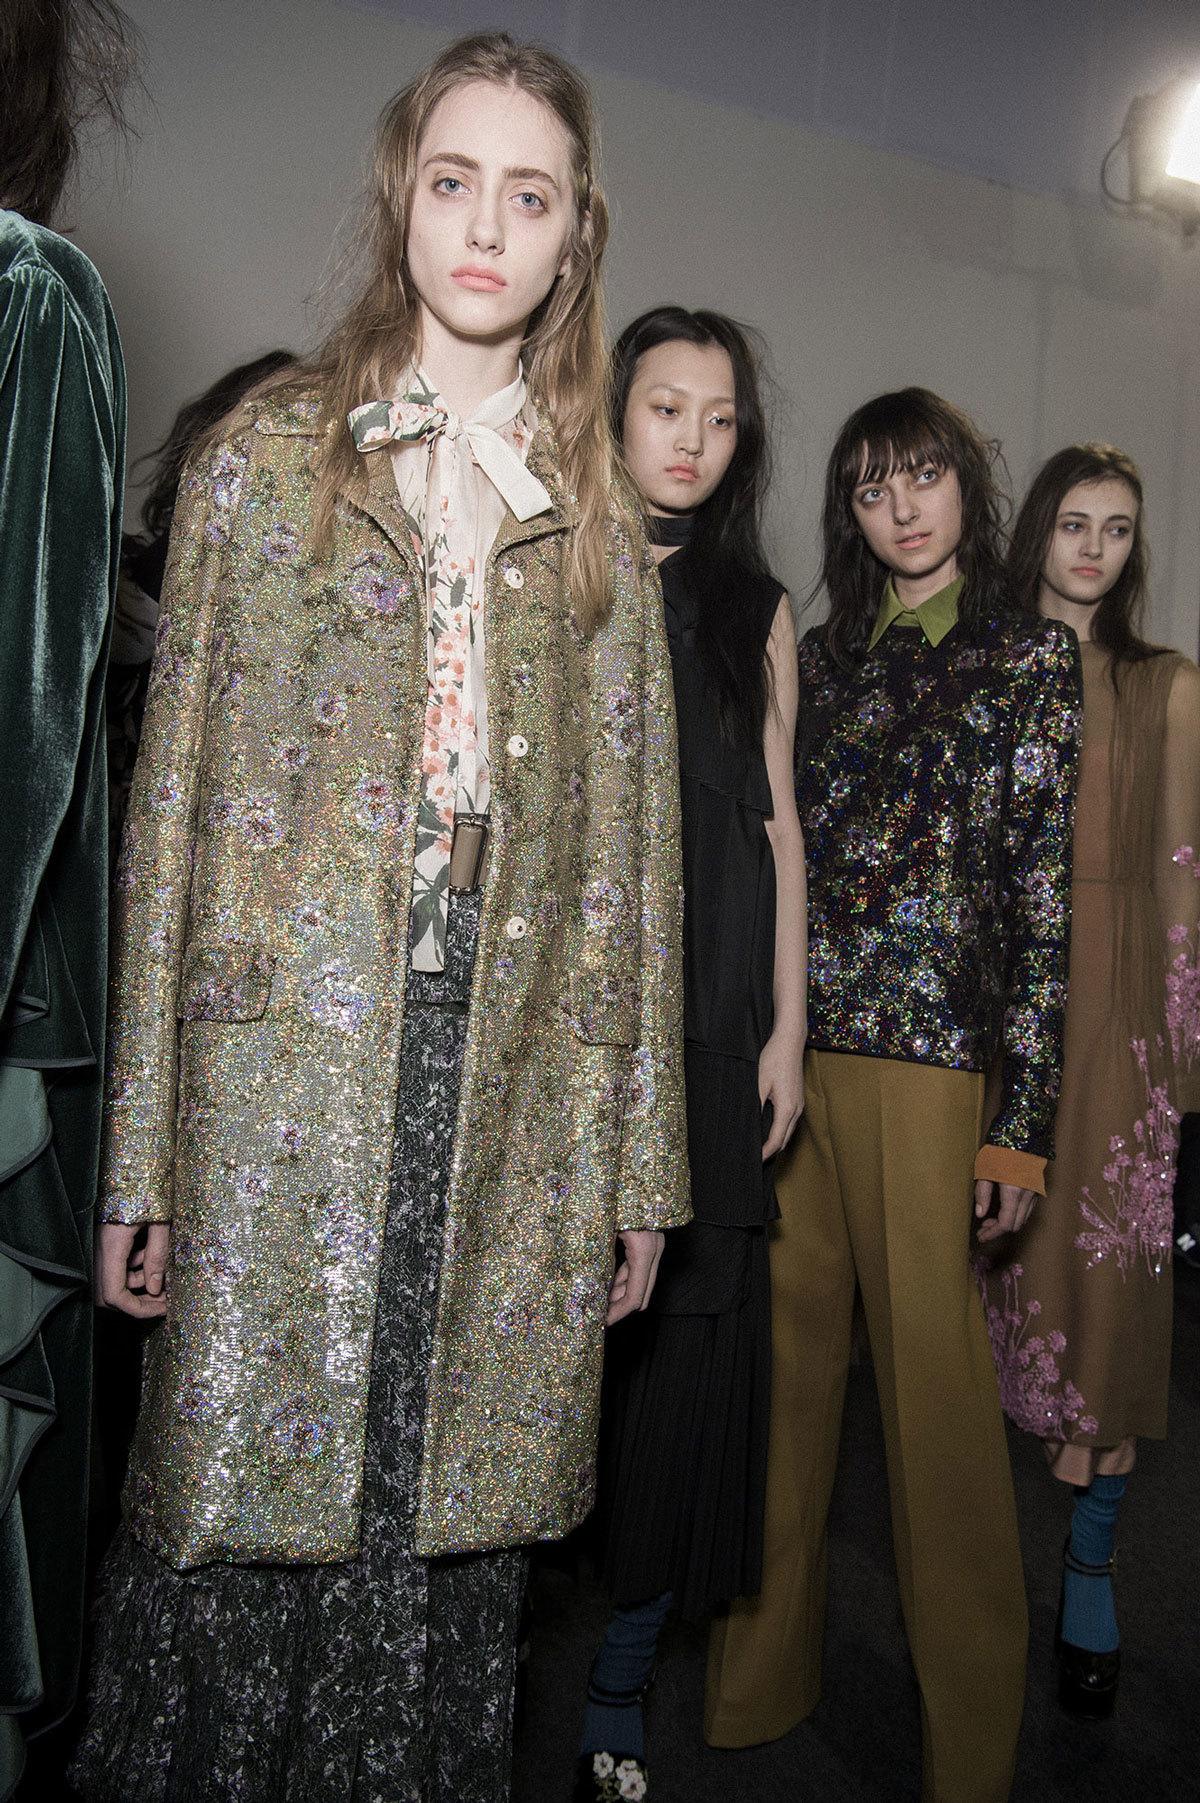 rochas' pensive glamour for fall/winter 16 | read | i-D